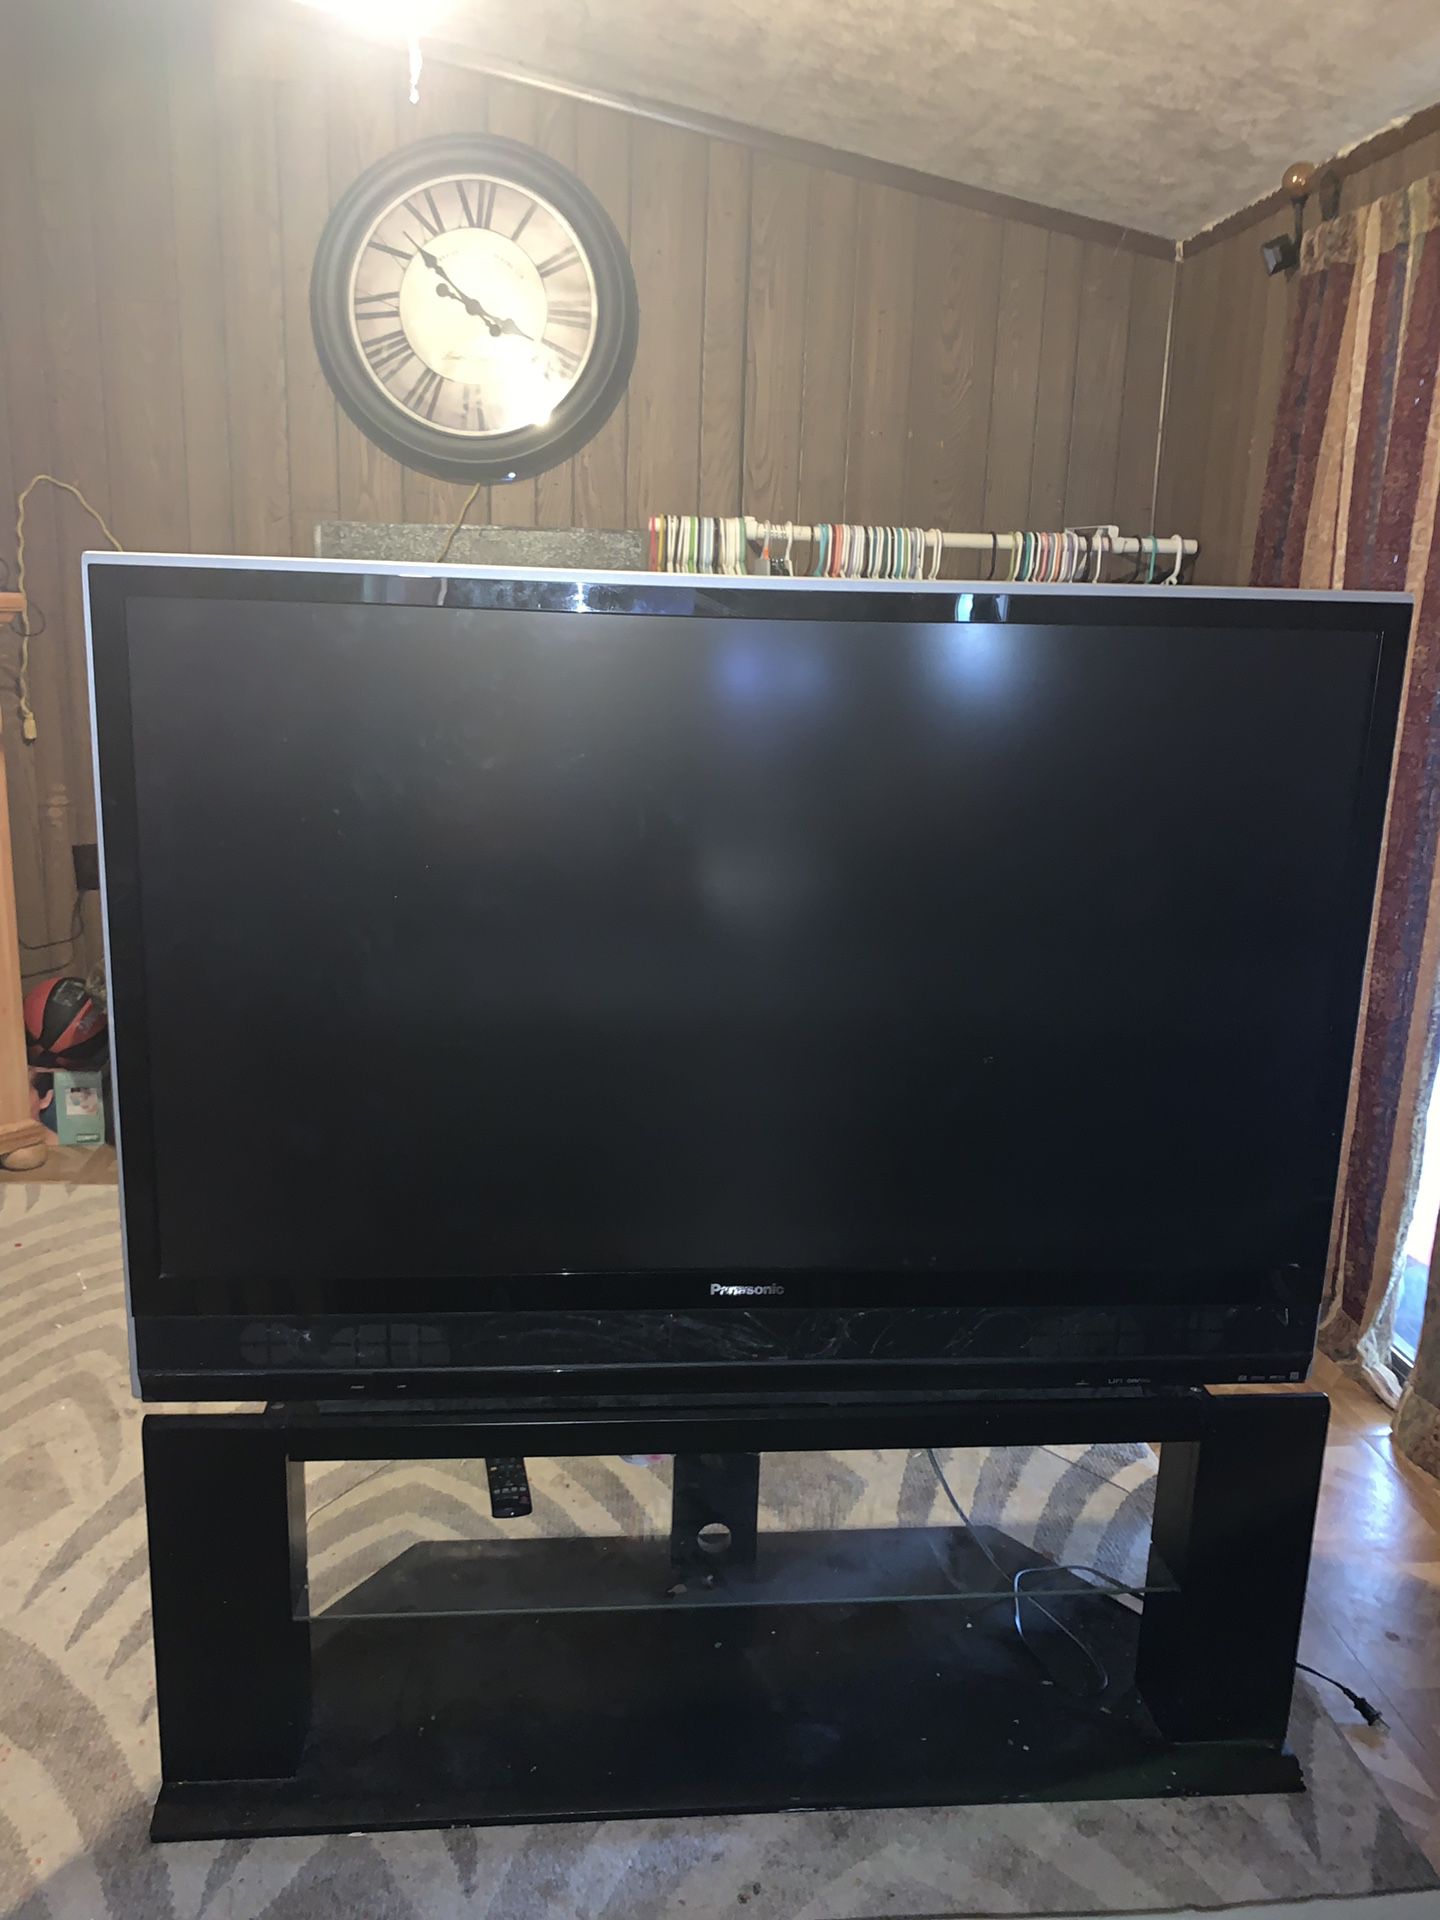 Panasonic tv around 50 inches. Needs a lamp replacement for about $30.